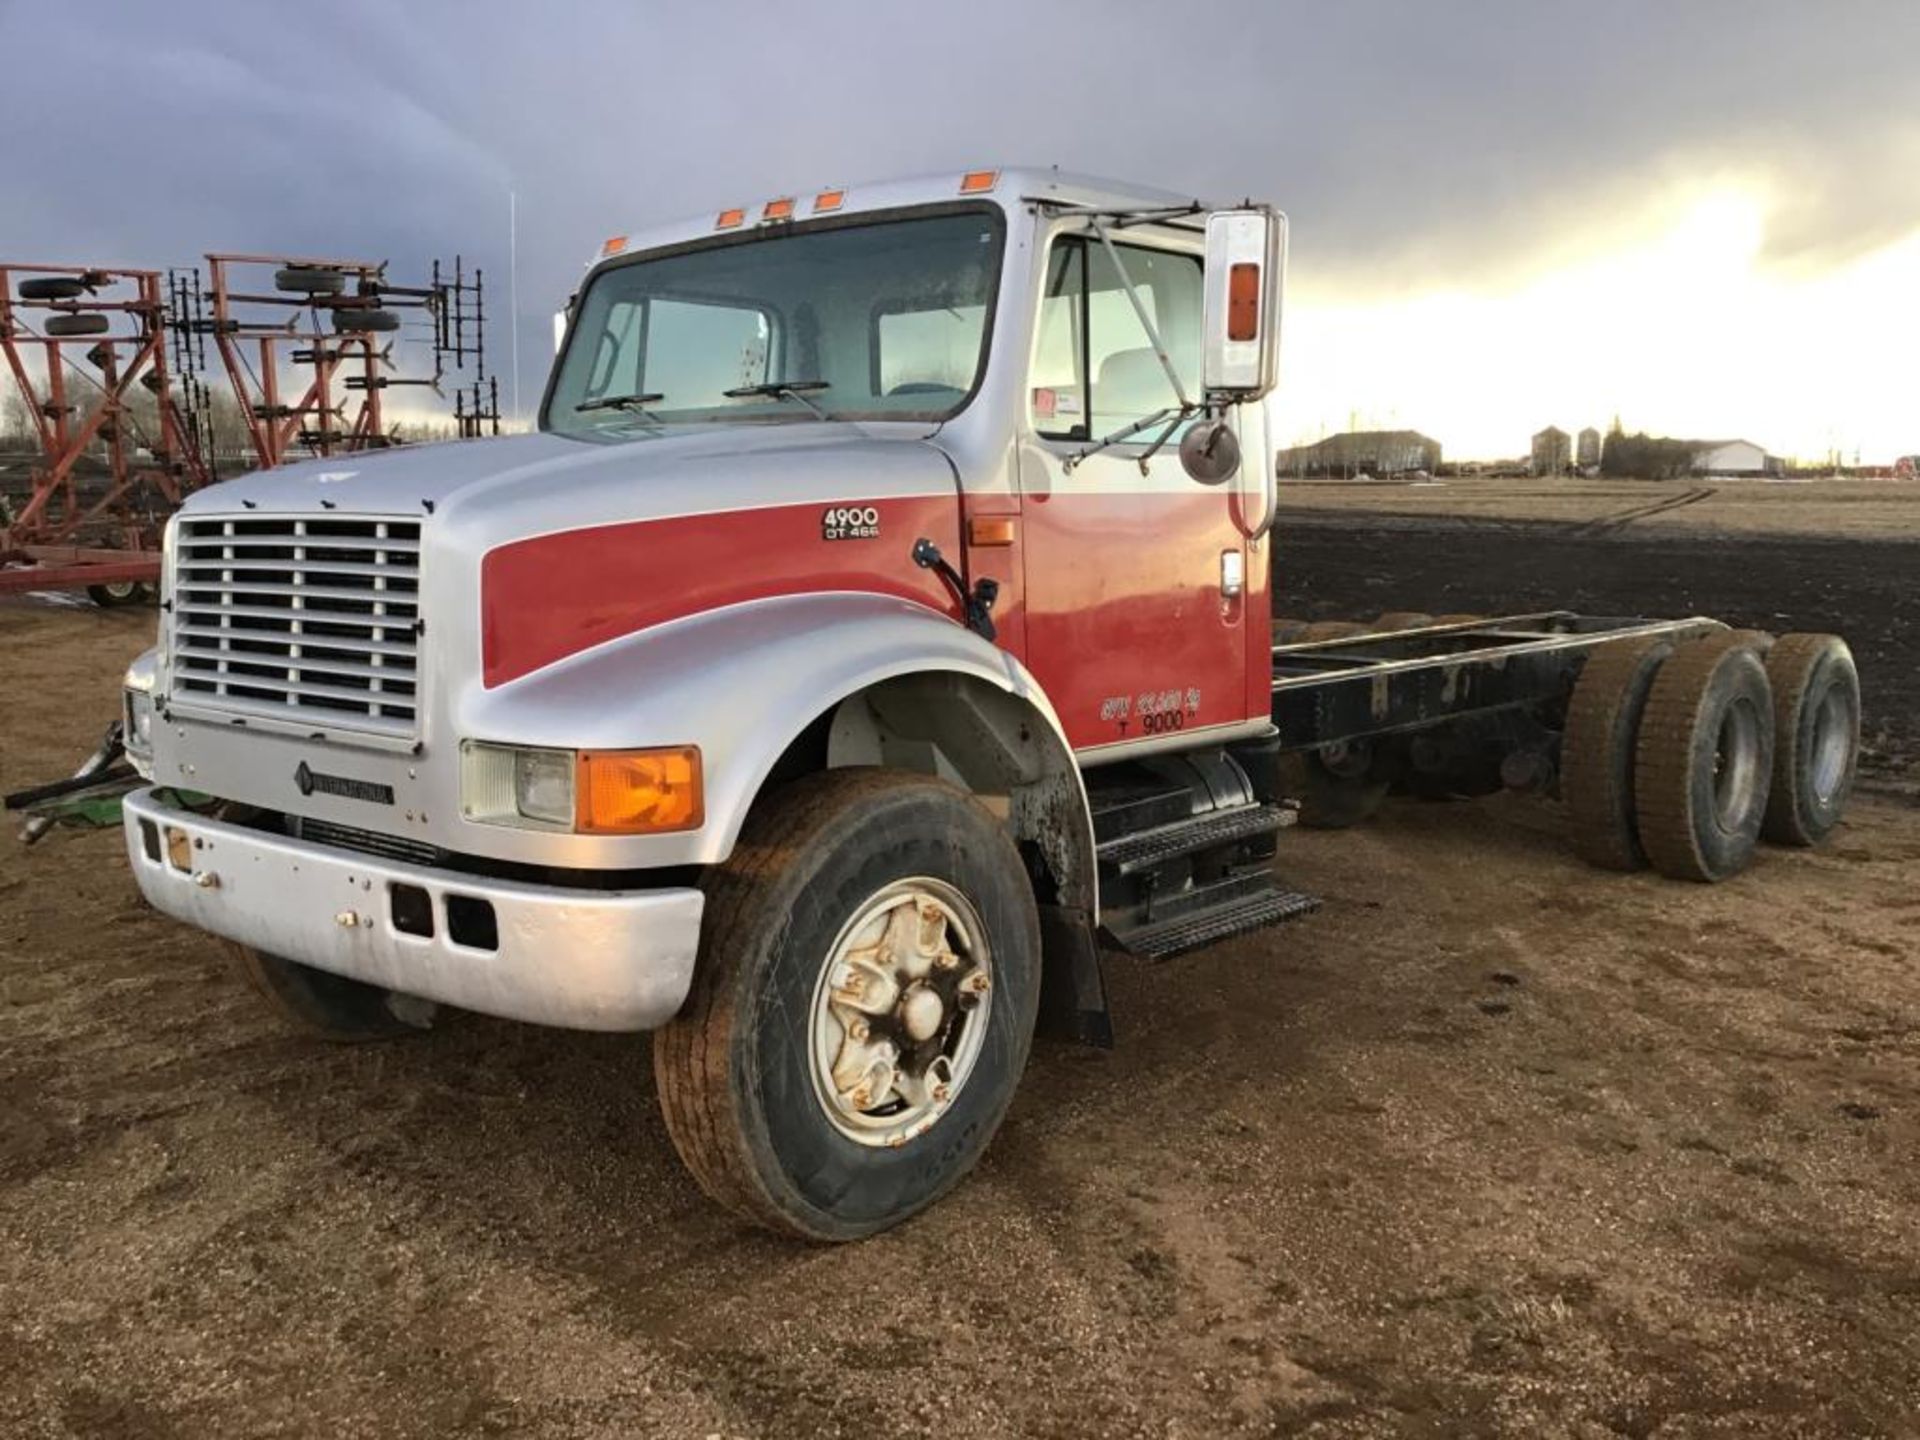 1991 IH 4900 T/A Cab & Chassis Truck Tractor VIN 1HTSG0008TH250342 466 Diesel Eng, 10spd Trans,